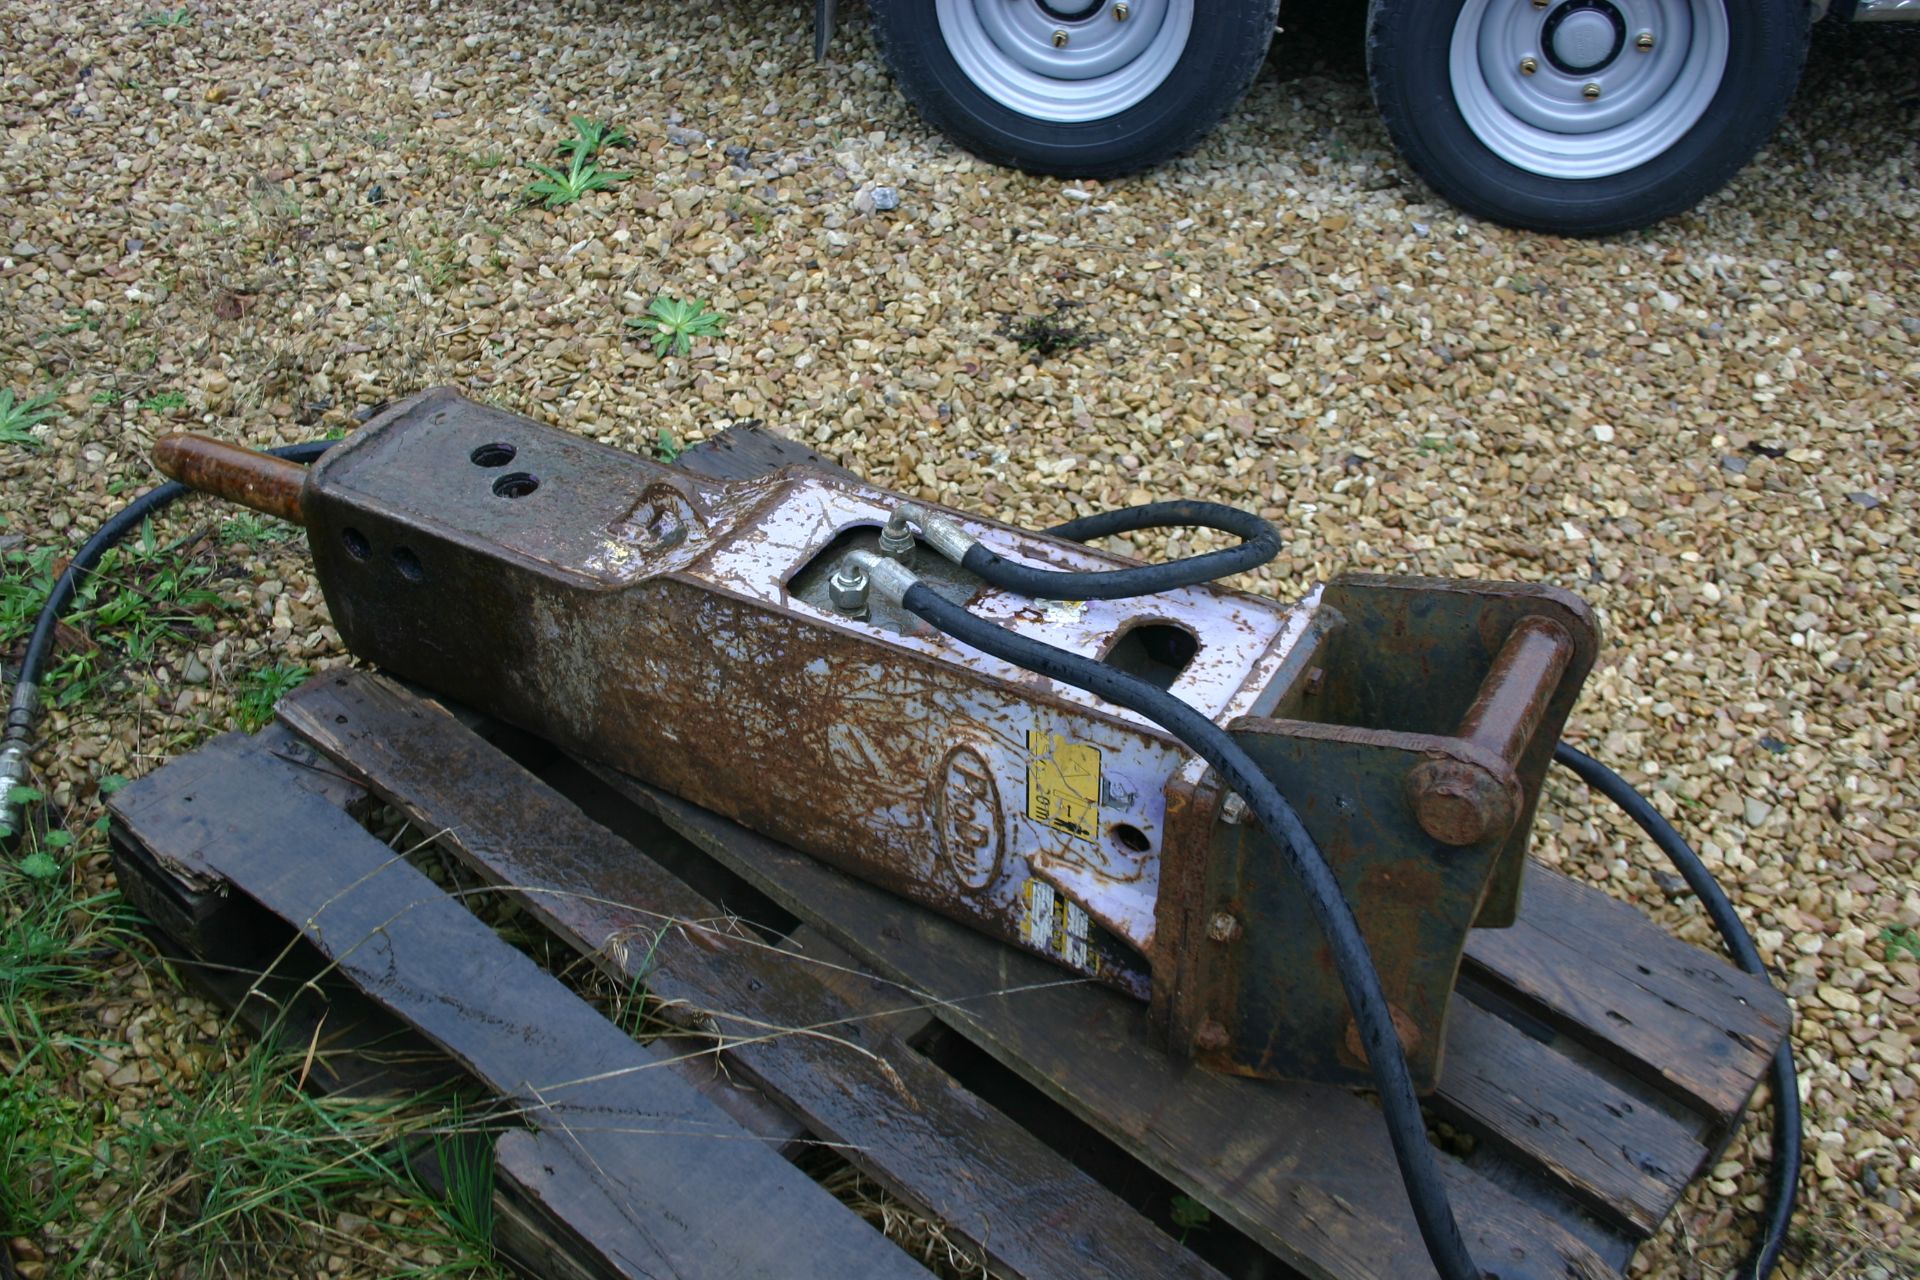 PRO DEM HYDRAULIC BREAKER ATTACHMENT, BELIEVED TO BE 2005 & CAME OFF 5 TON MACHINE *PLUS VAT* - Image 3 of 3